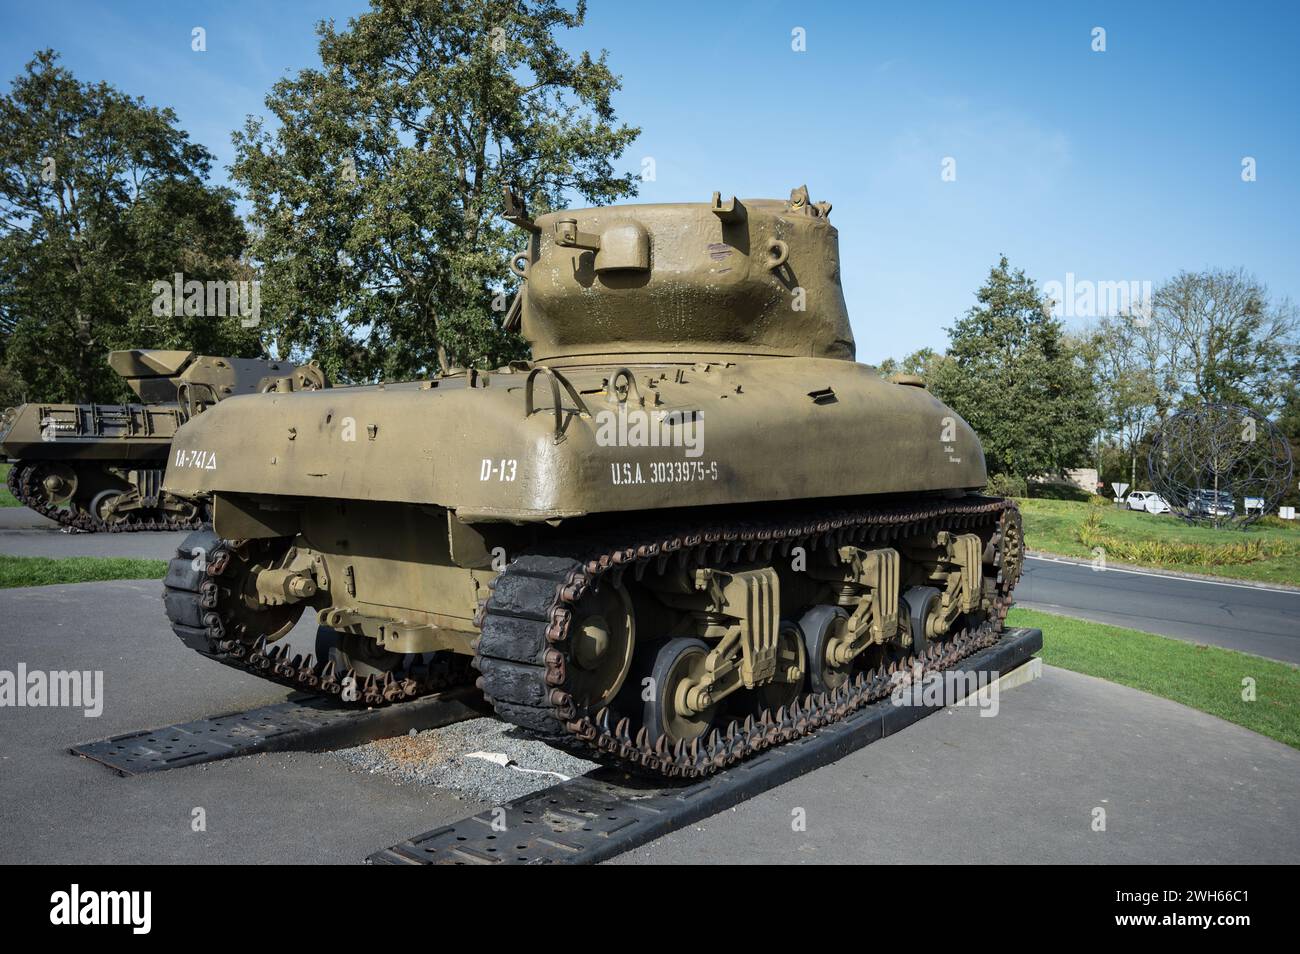 The rear view of famous American WWII tank M4 Sherman M4A1 in Normandy Stock Photo